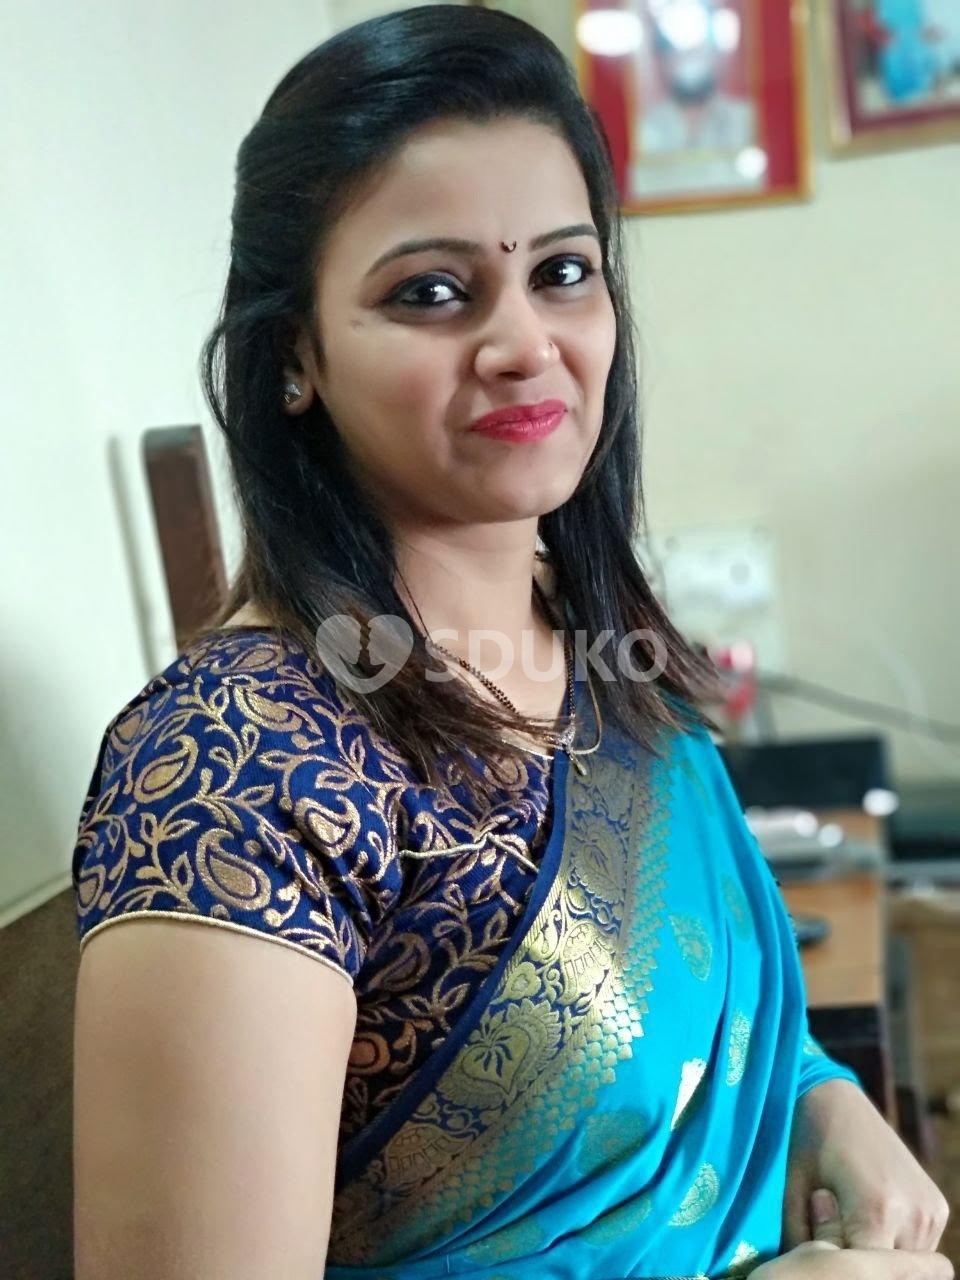 Kr Puram......🌟..low price 🥰100% SAFE AND SECURE TODAY LOW PRICE UNLIMITED ENJOY HOT COLLEGE GIRL HOUSEWIFE AUNTIE